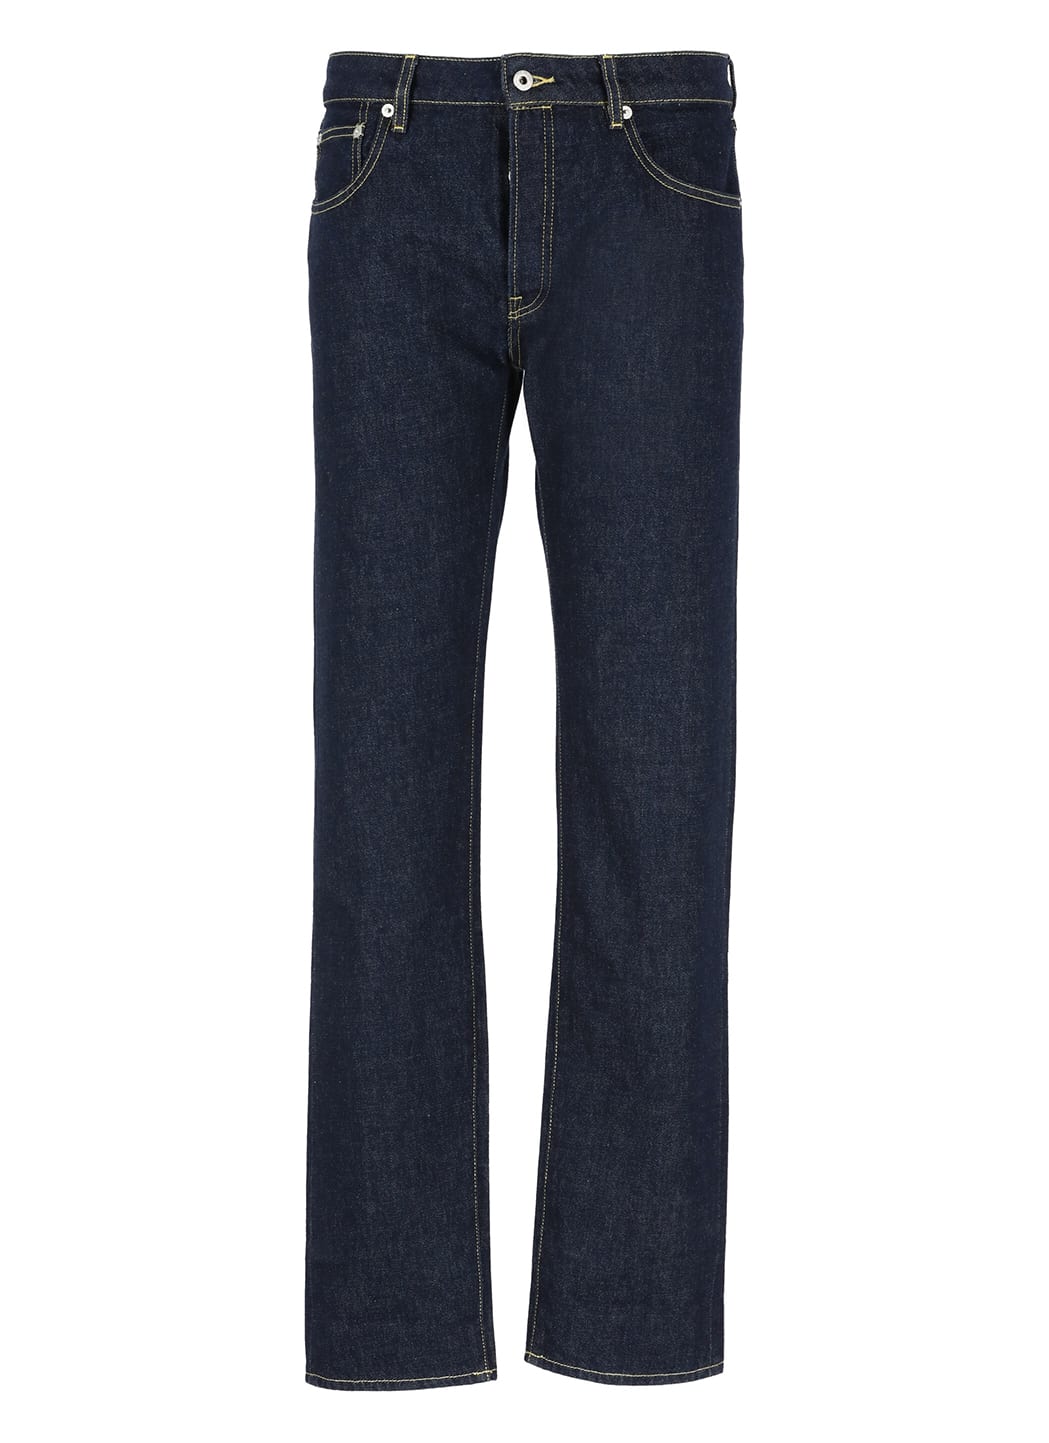 Shop Kenzo Creations Bara Jeans In Blue